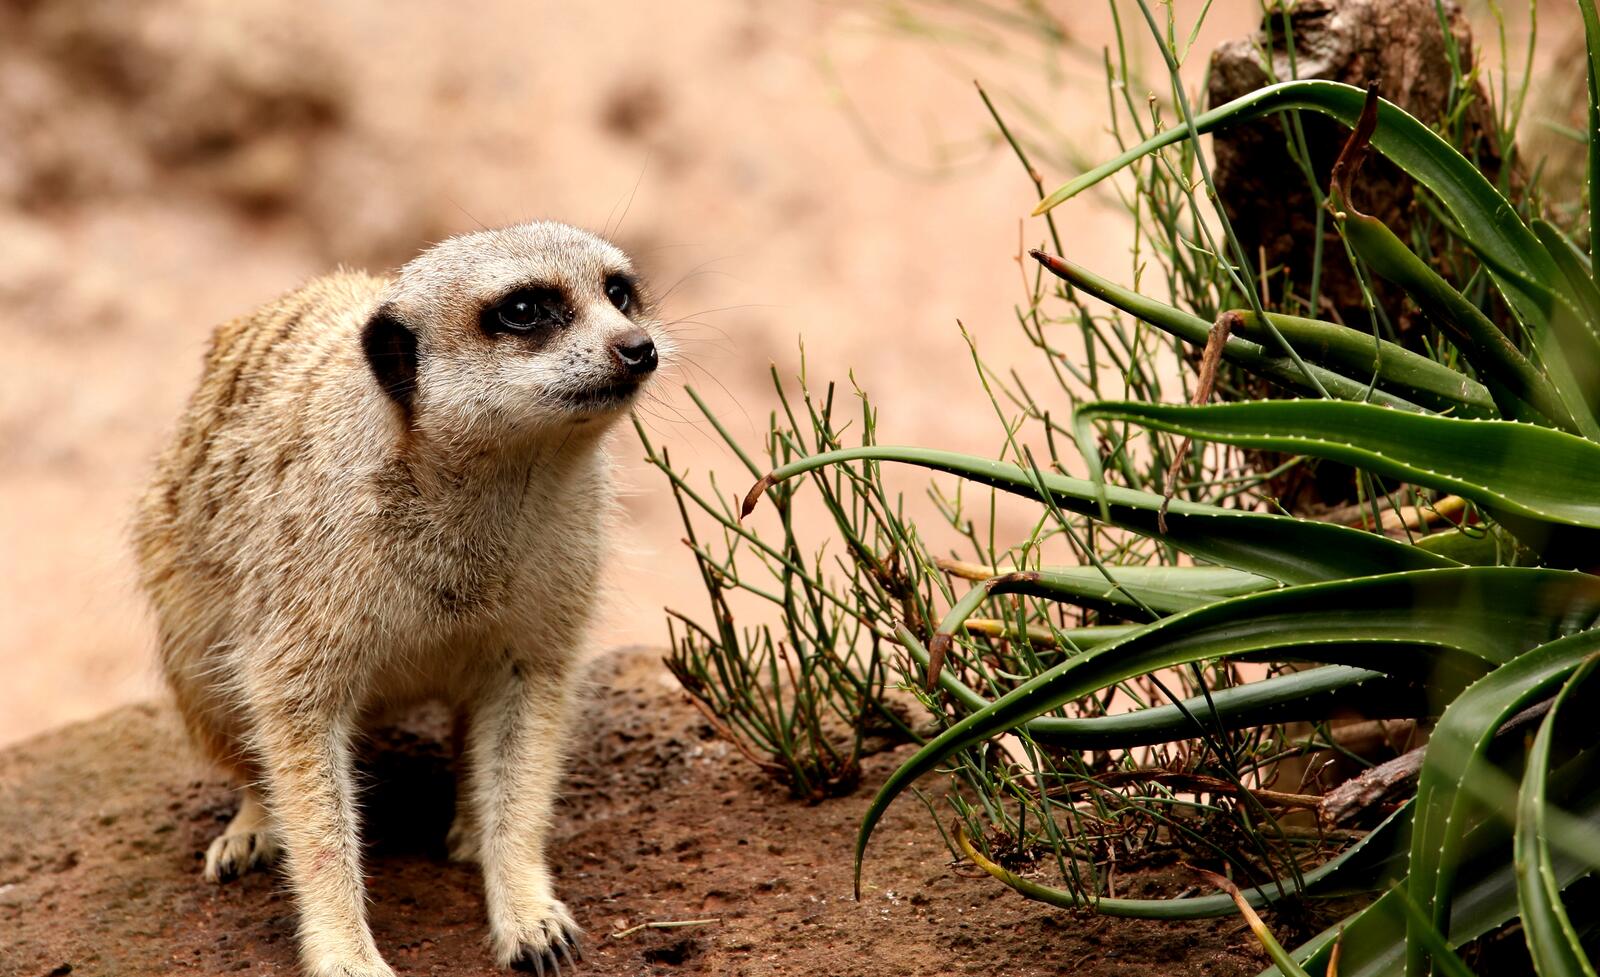 Wallpapers suricata seeds as well as insects meerkat family on the desktop